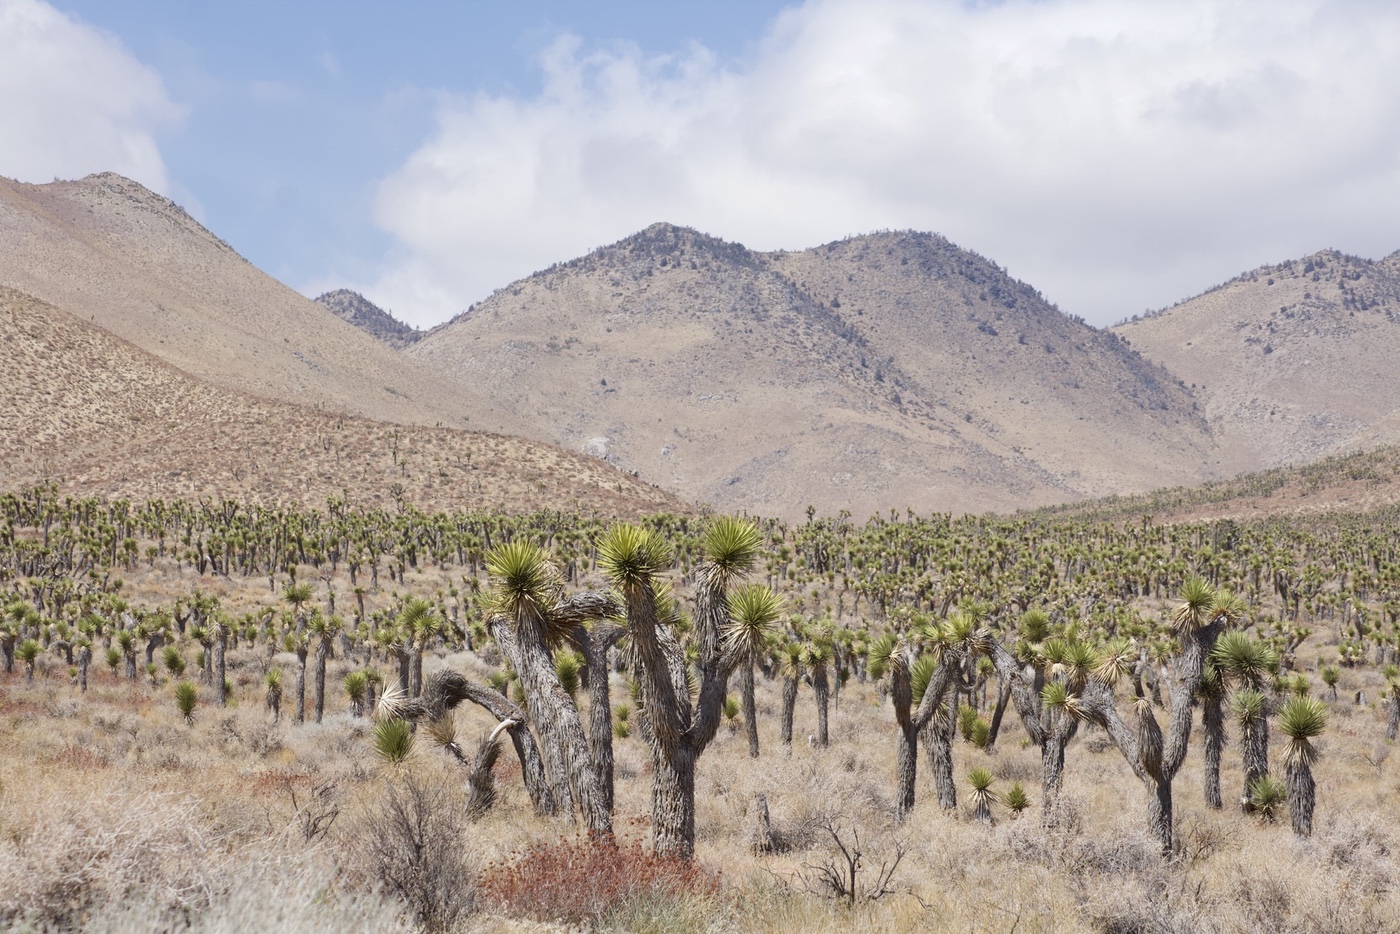 A grove of Joshua trees off CA 178 in the foothills of the Sierra Nevada